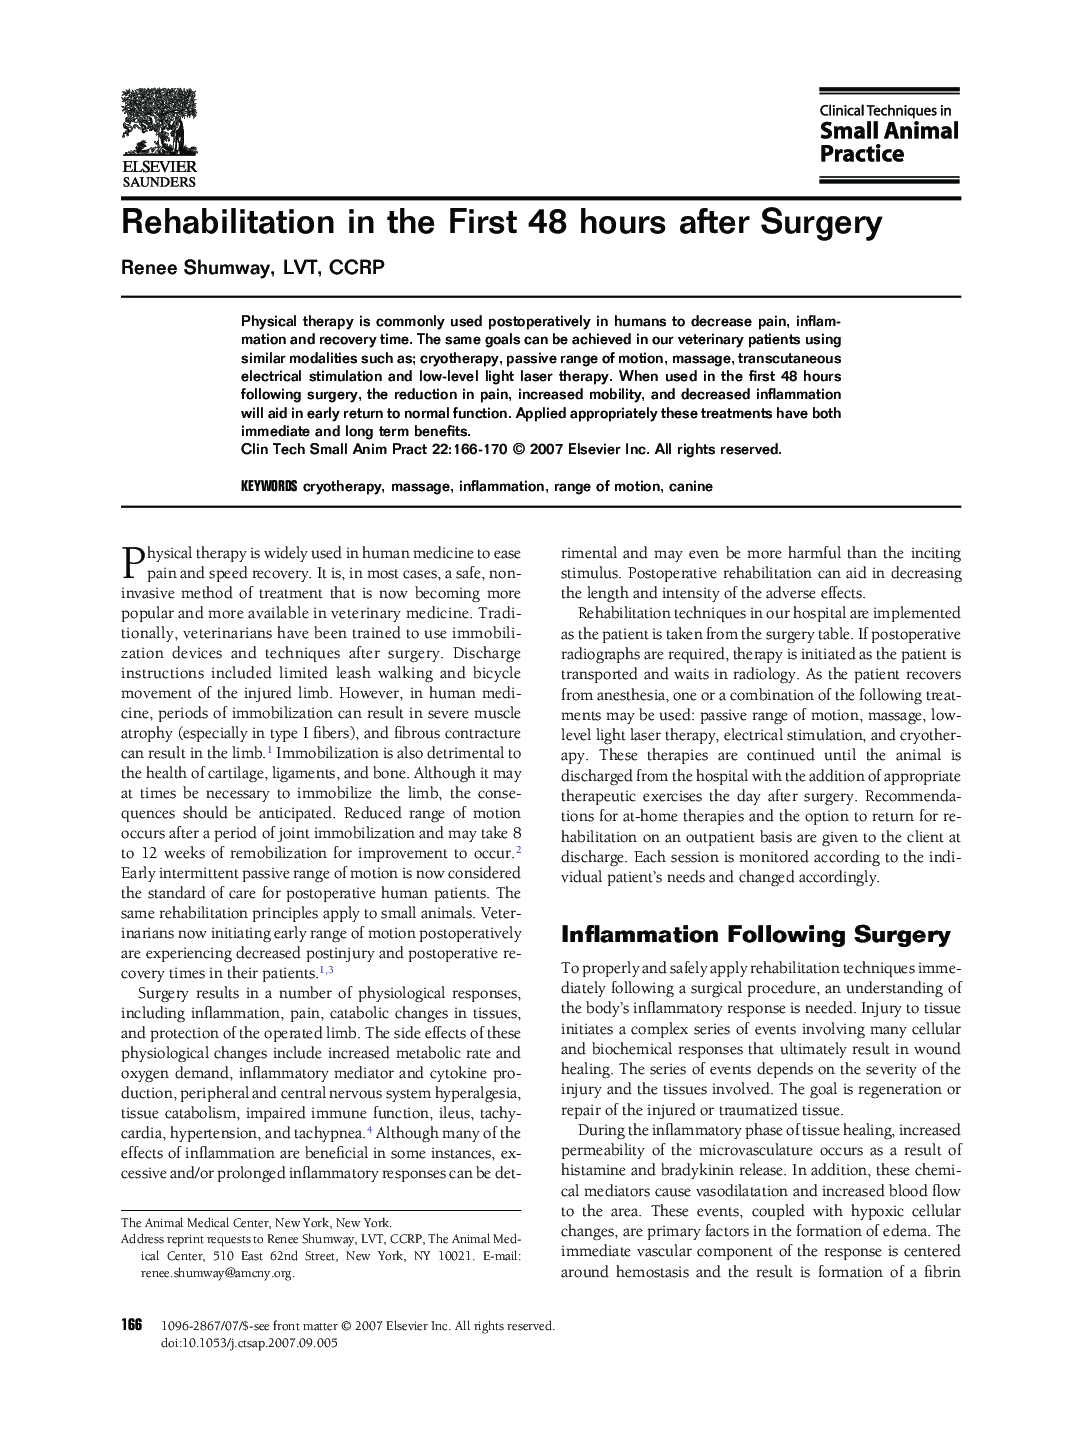 Rehabilitation in the First 48 hours after Surgery